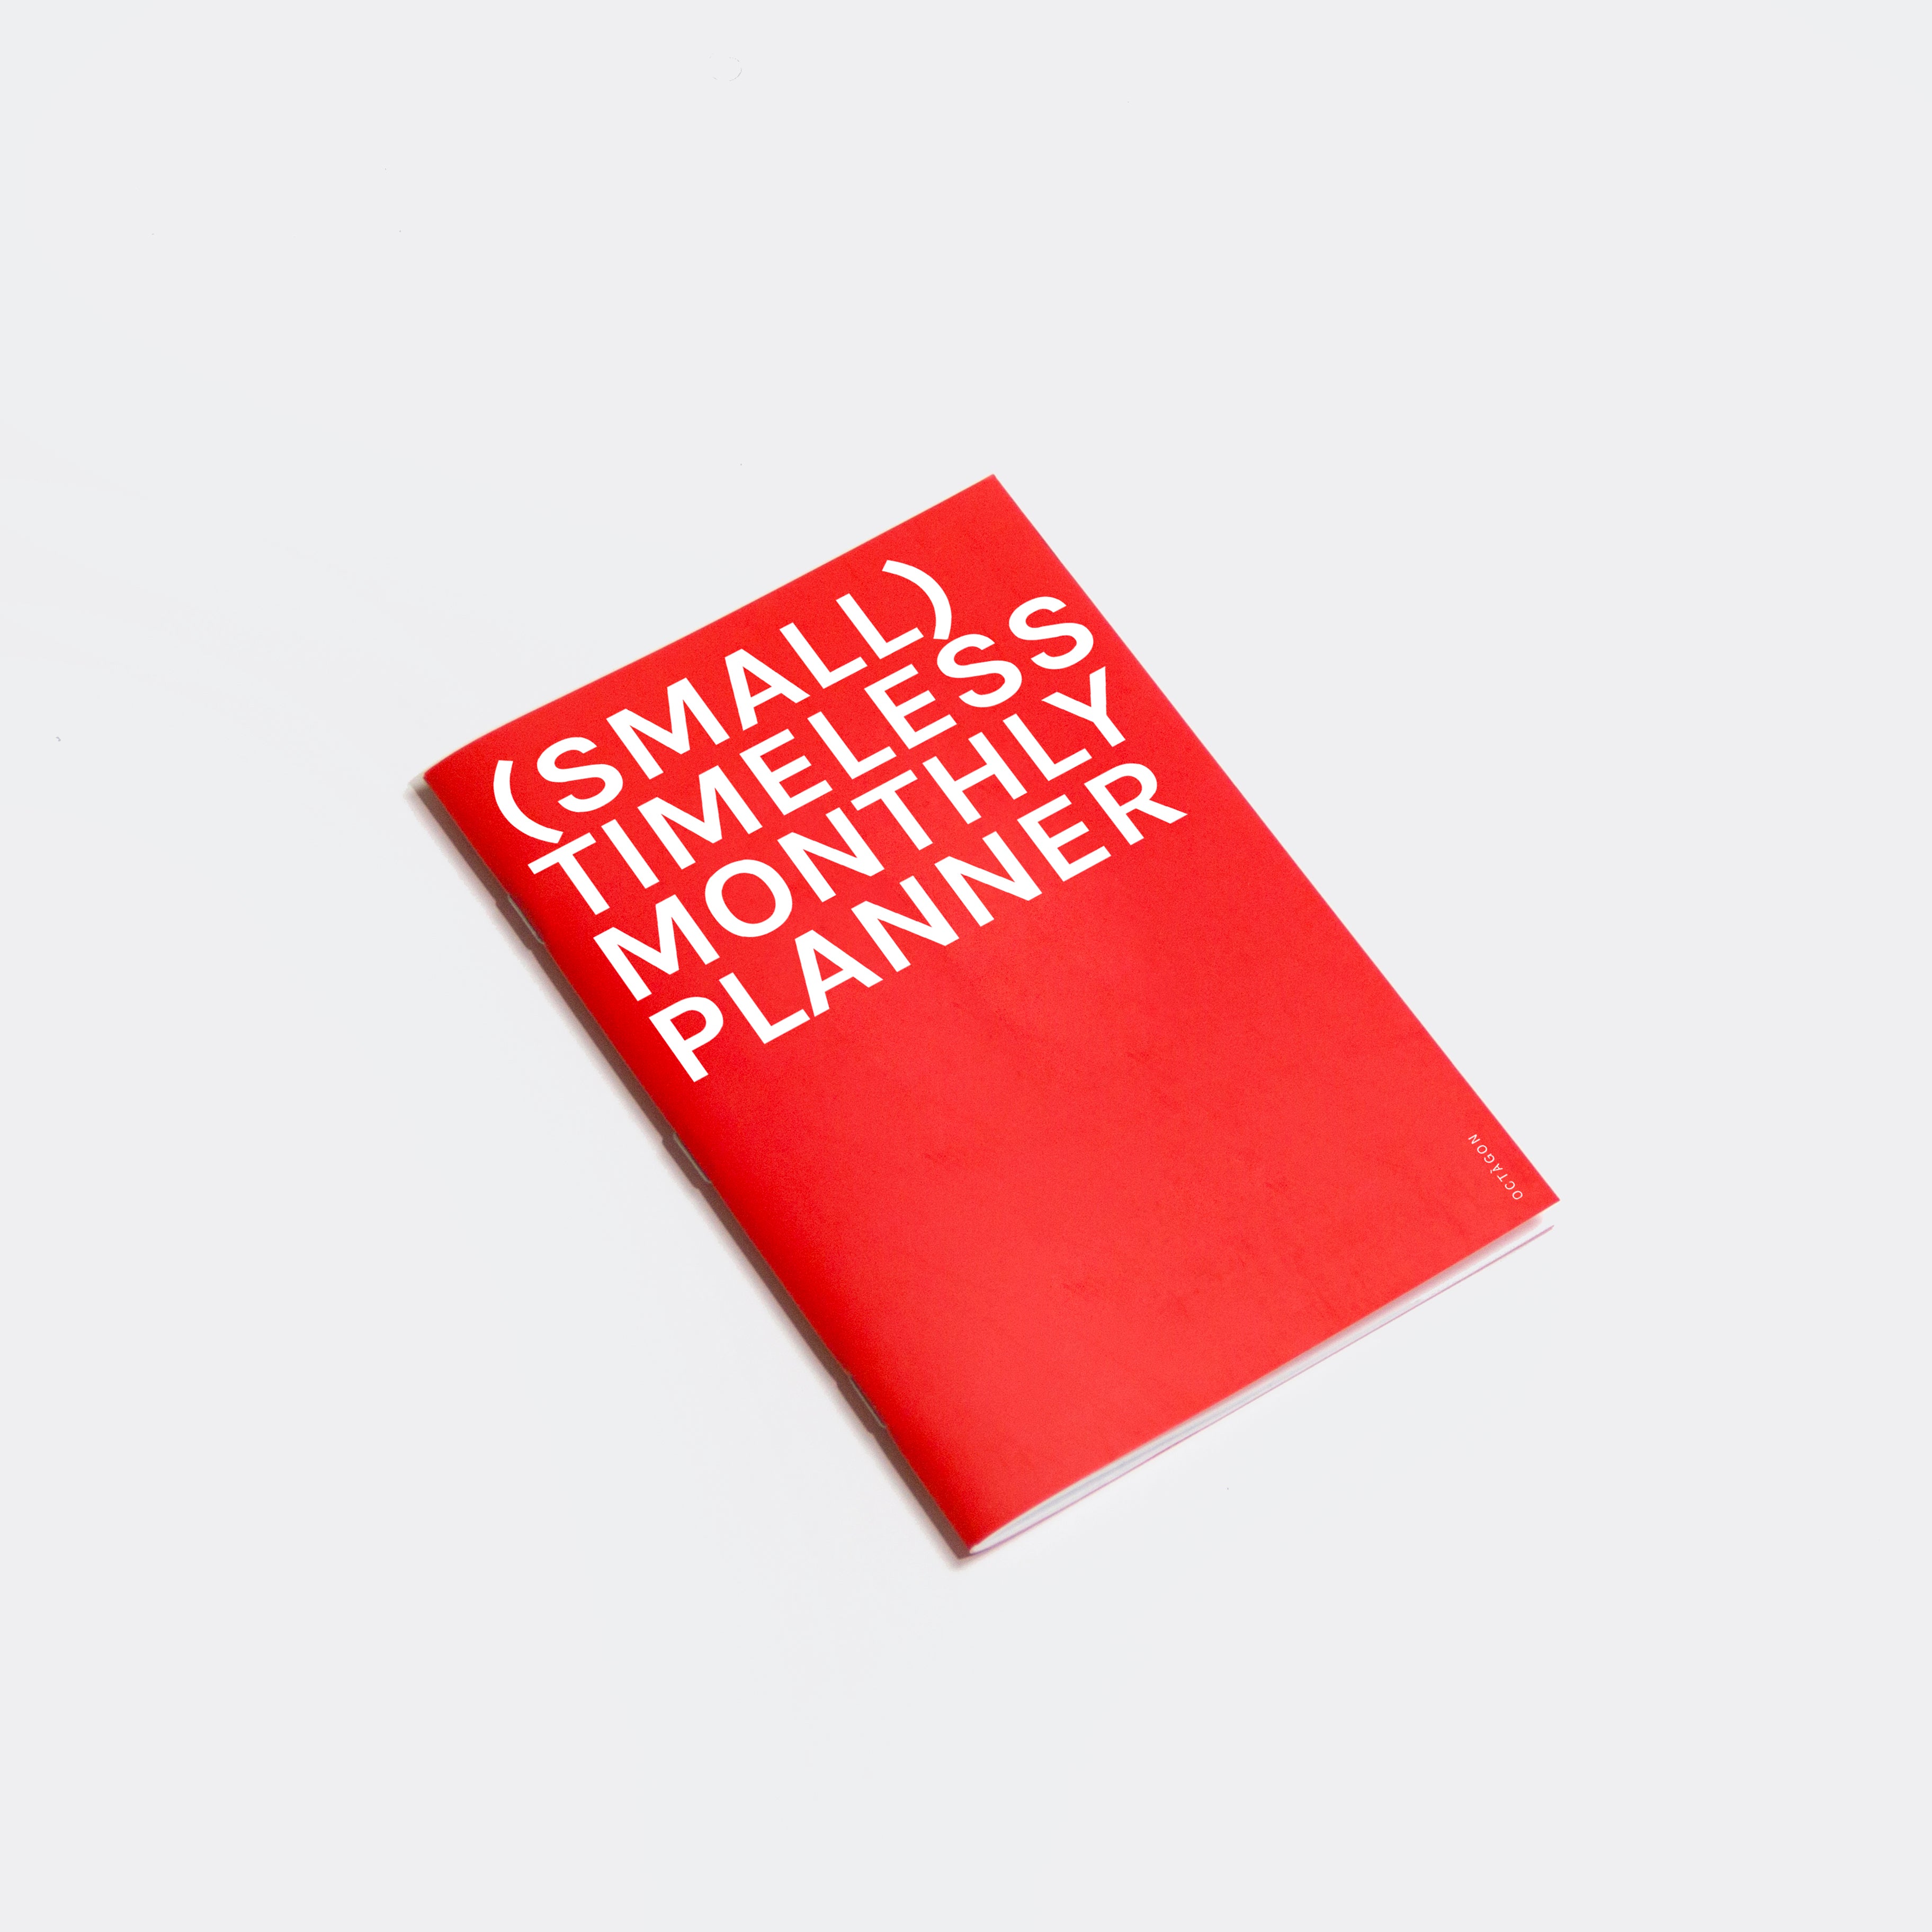 OCTÀGON DESIGN | &quot;Monthly Planner | Similar A5 Size&quot; timeless monthly planner, red color, white typography.